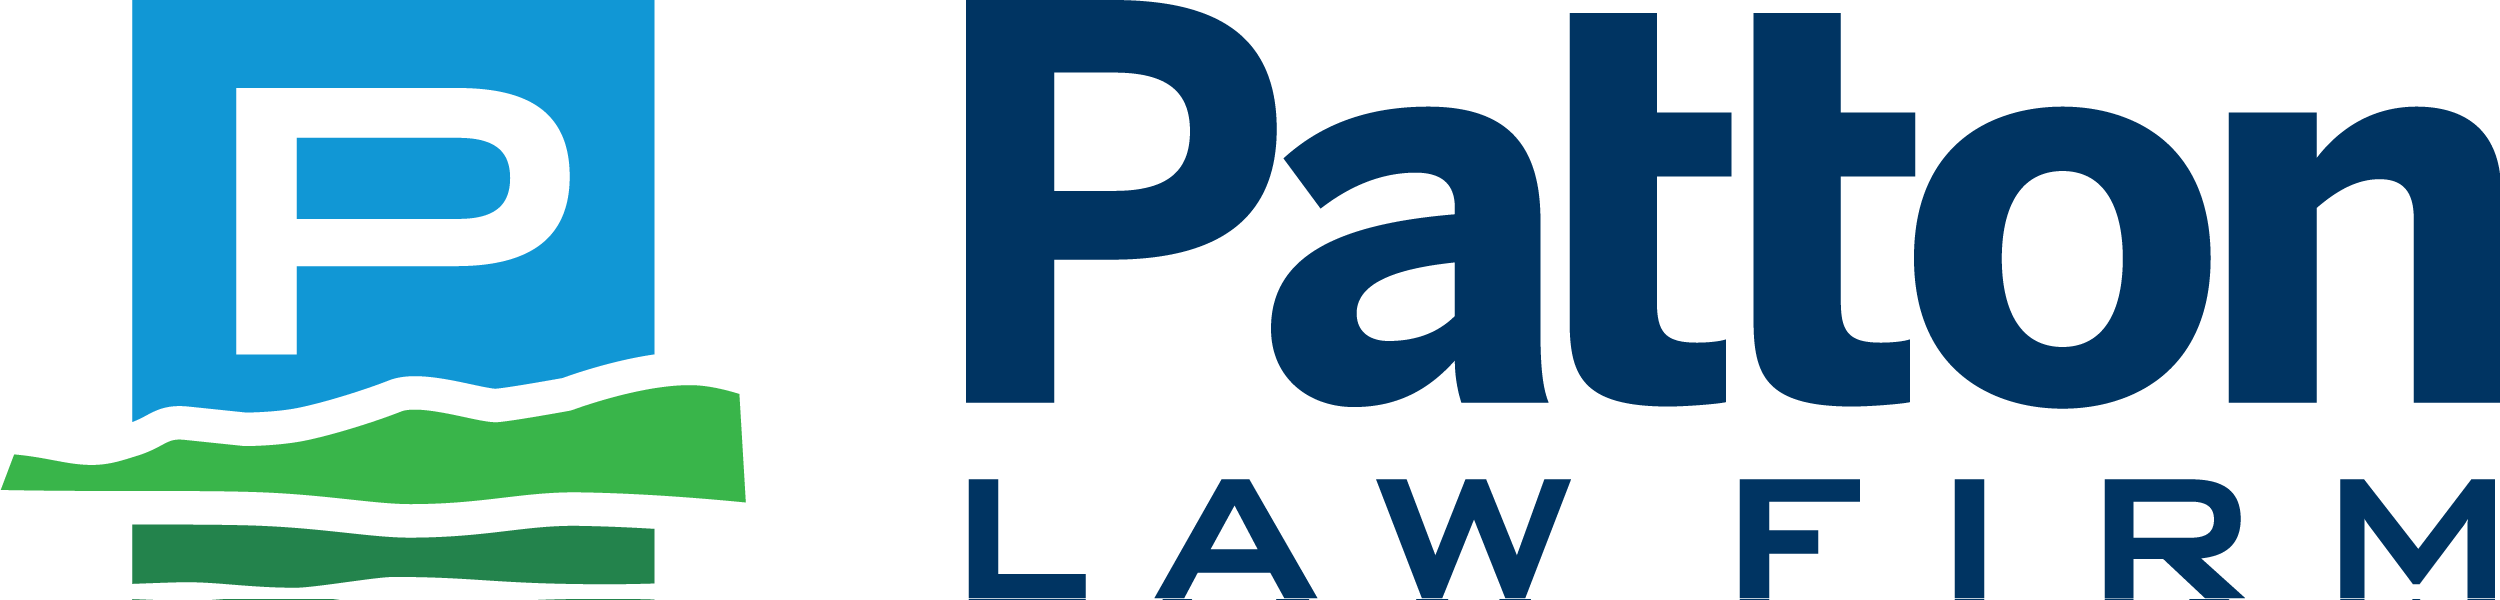 Patton Law Firm